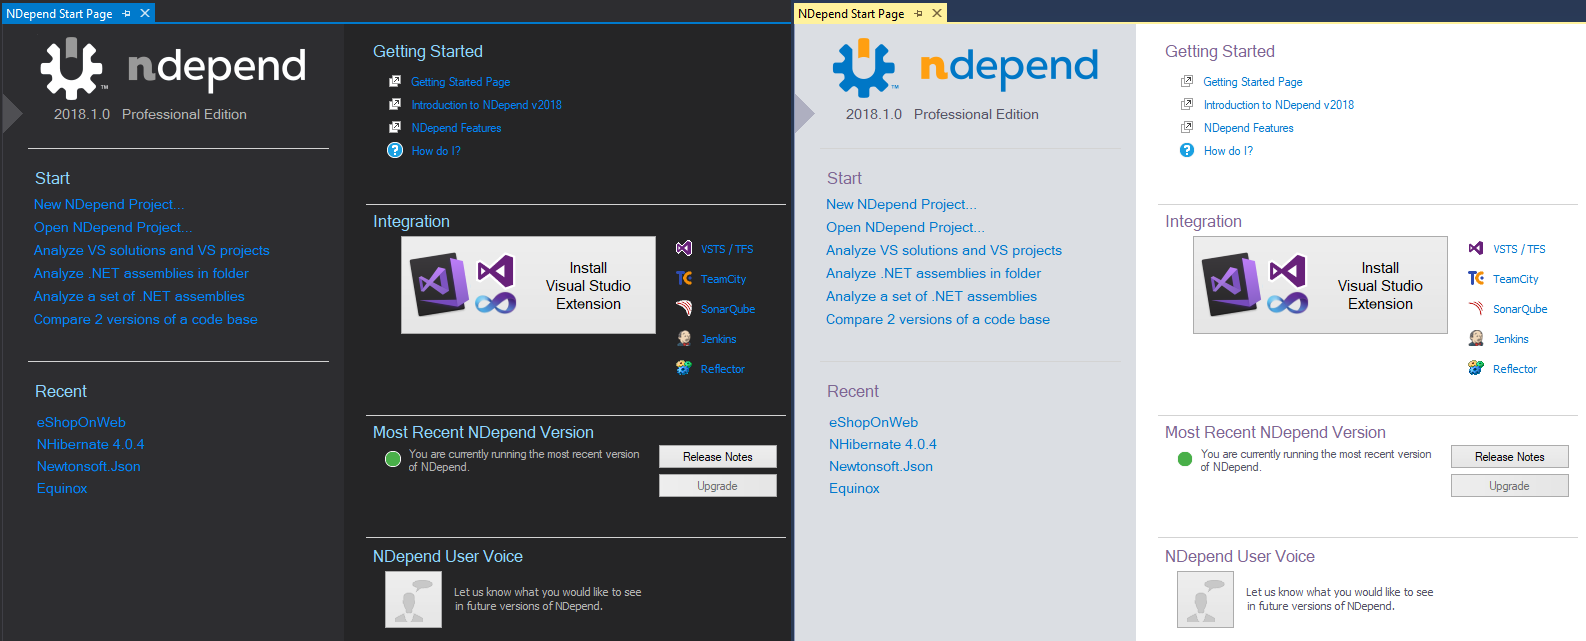 NDepend Start Page support for Dark Theme